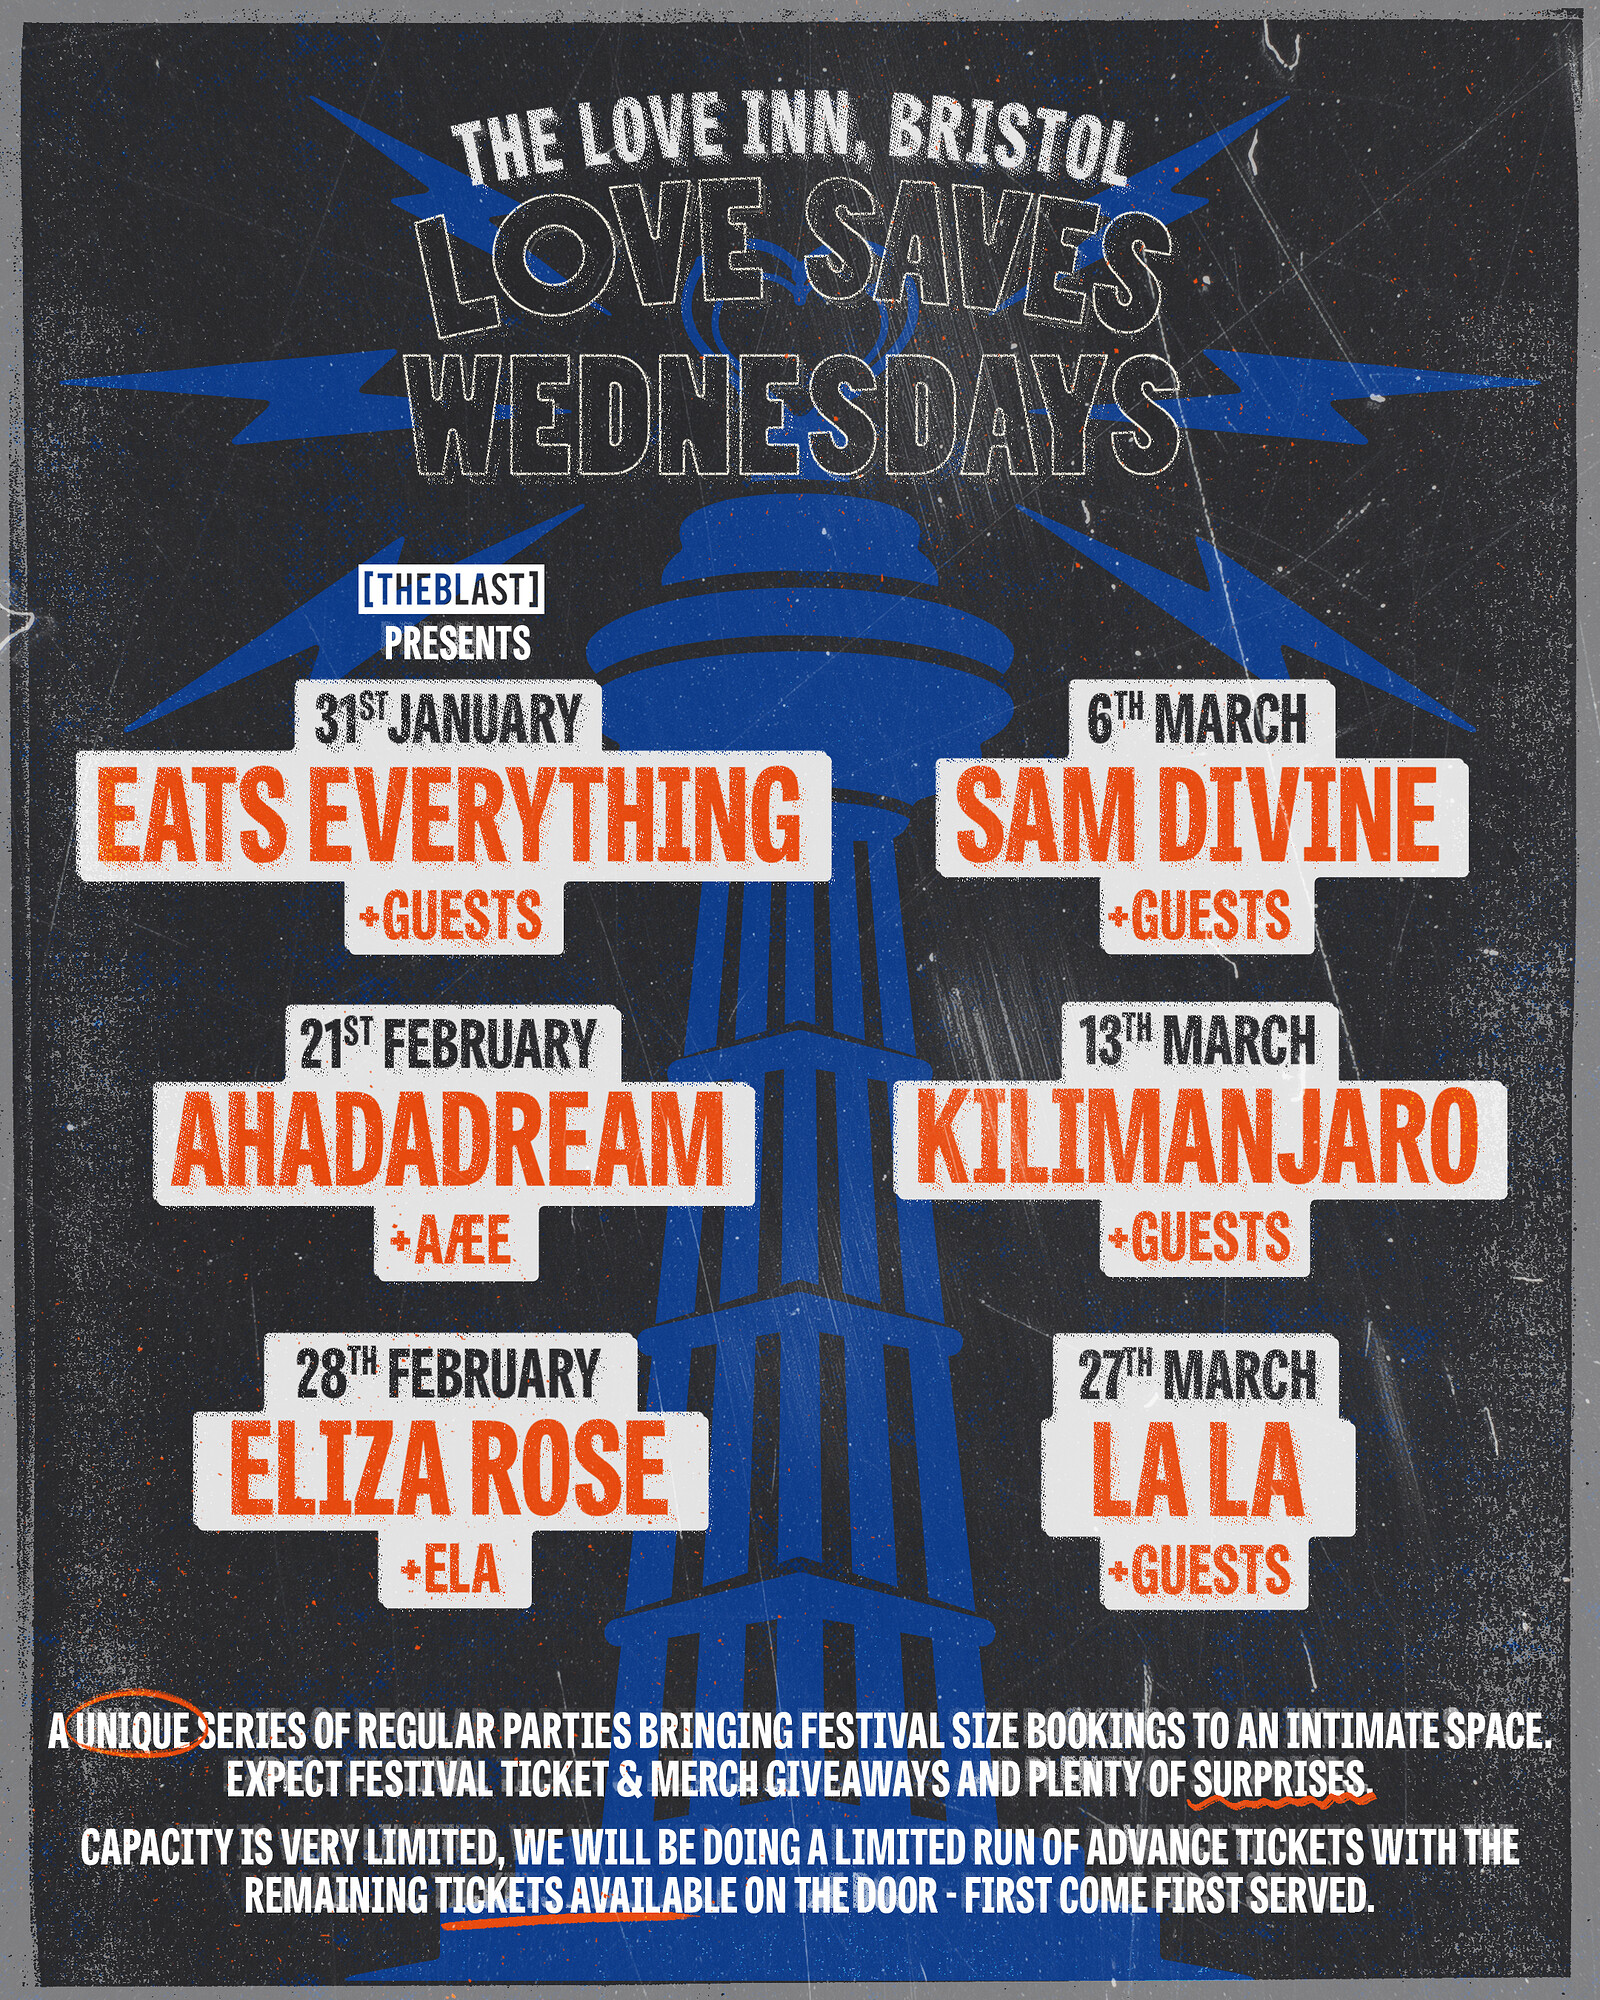 Love Saves Wednesdays w/ La La + Guests at The Love Inn